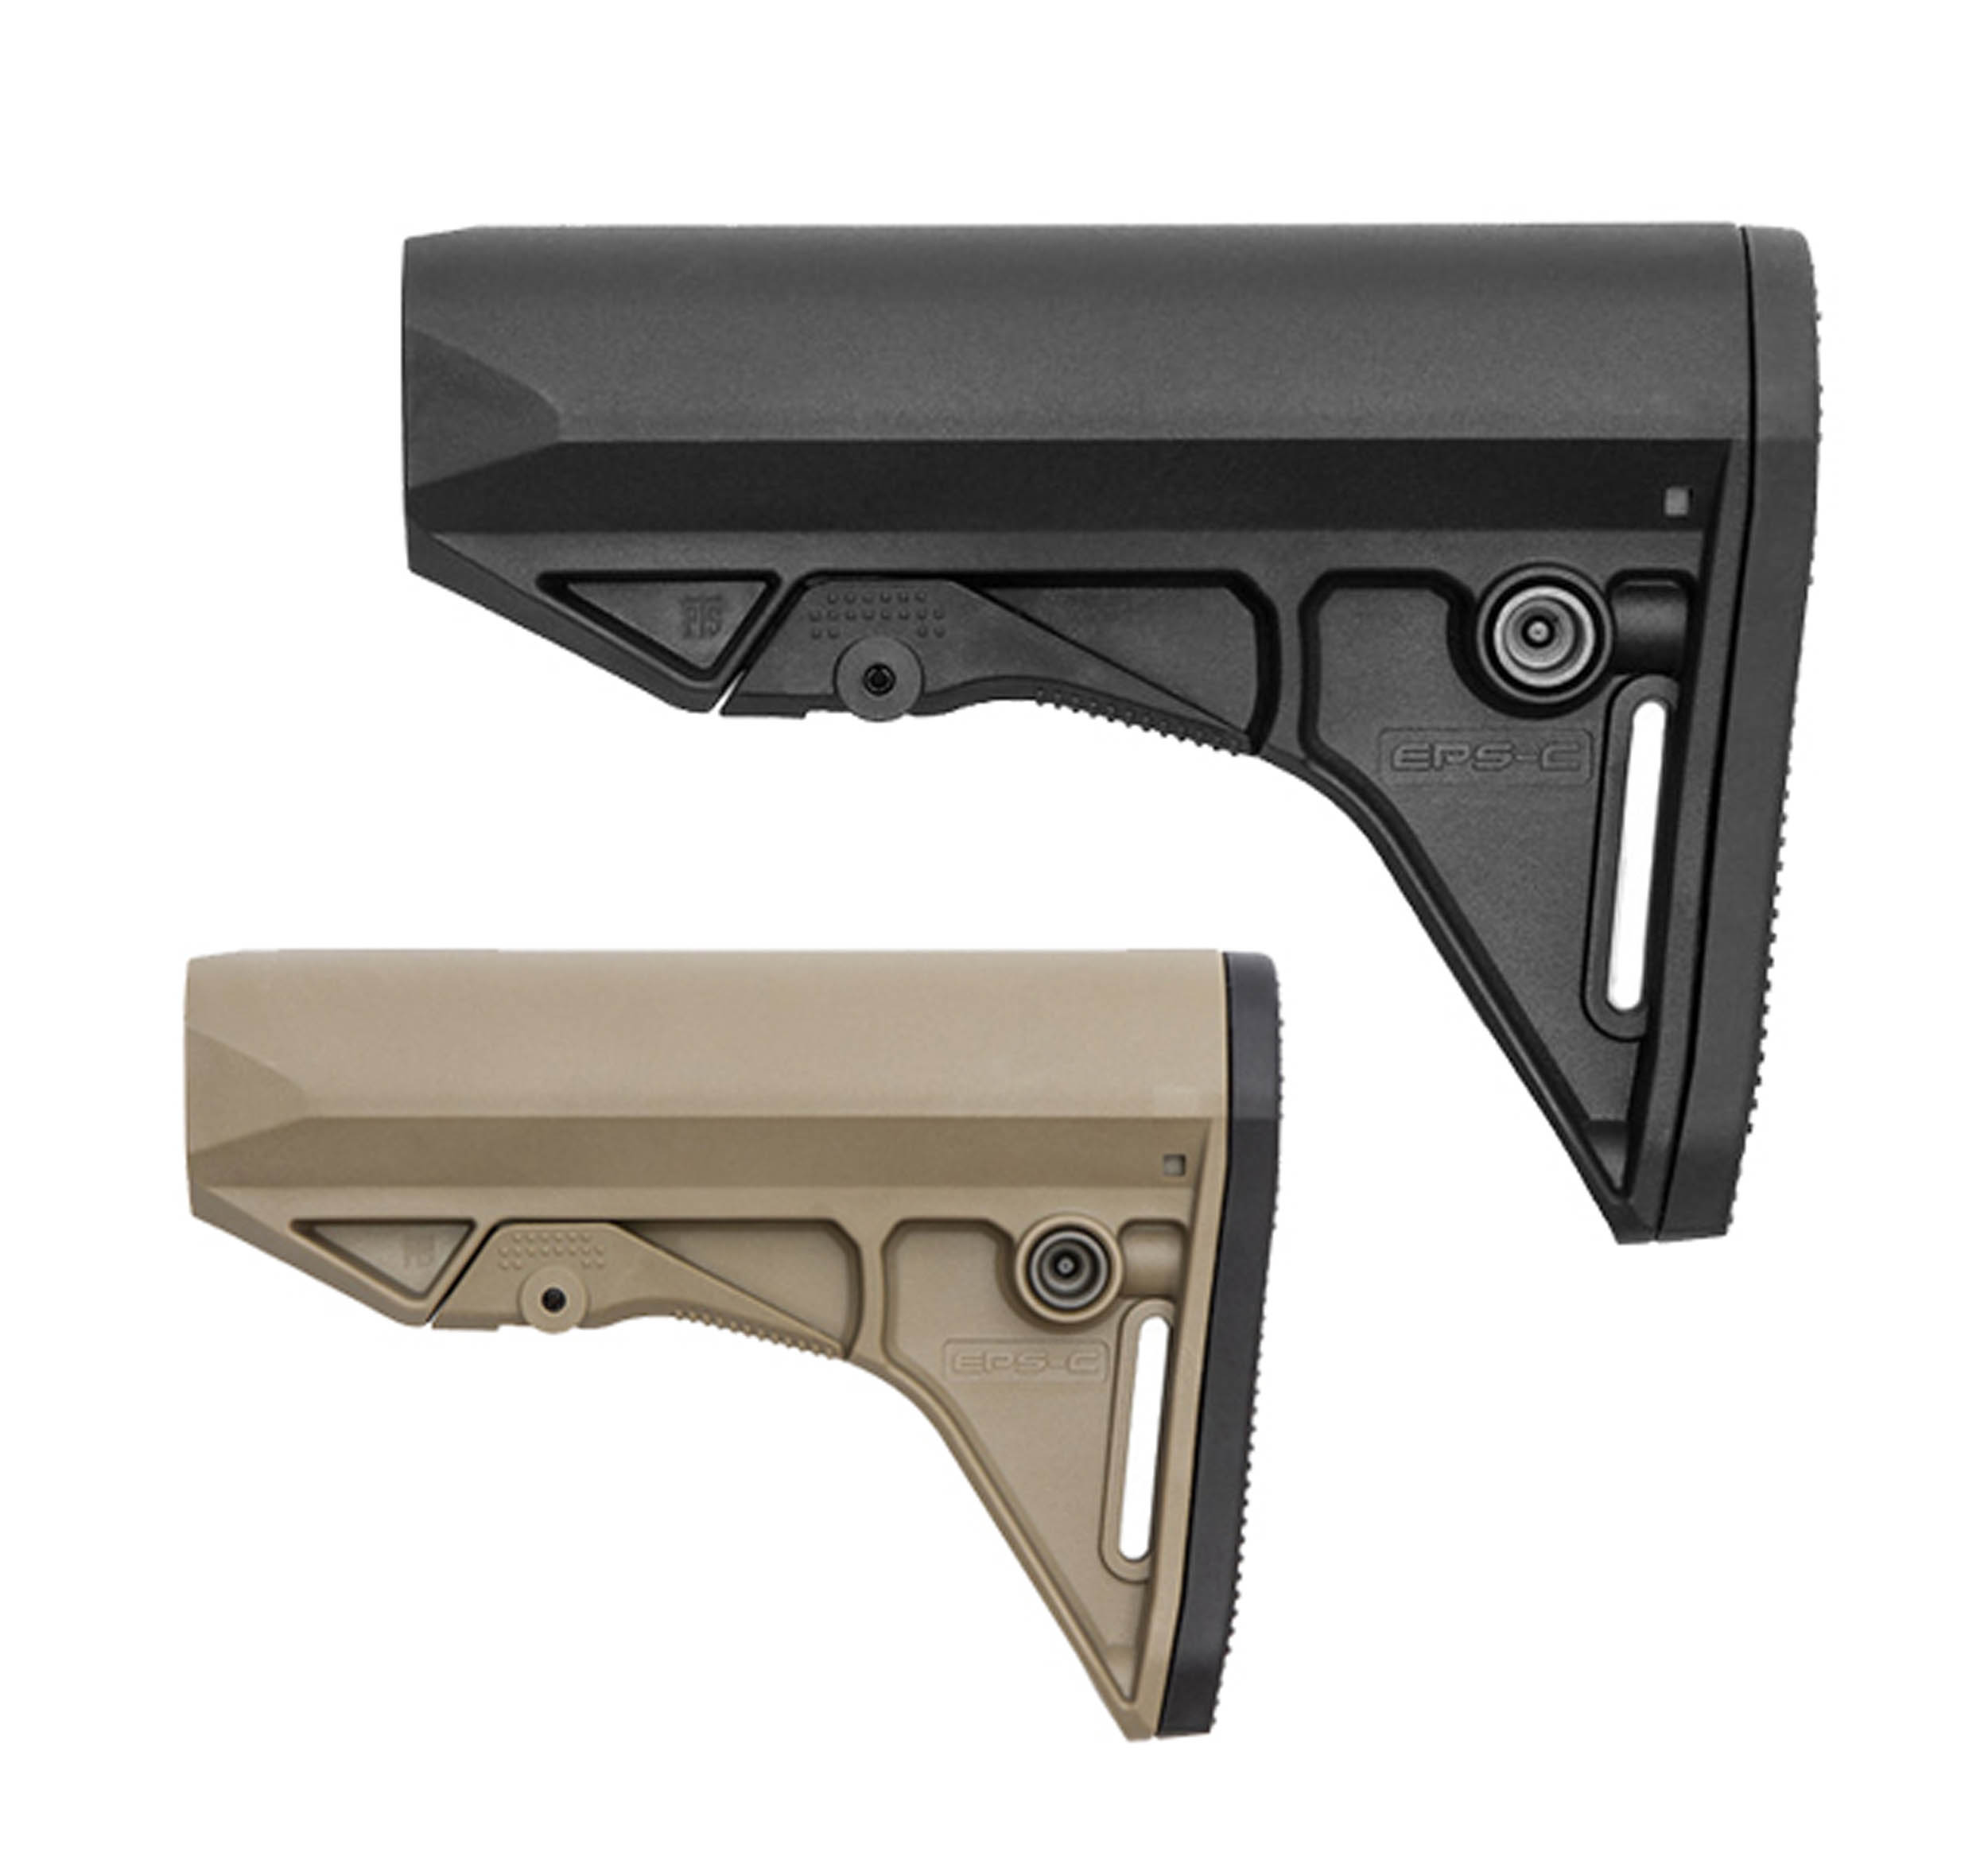 Crosse airsoft PTS EPS-C pour M4 - FDE - PTS Syndicate